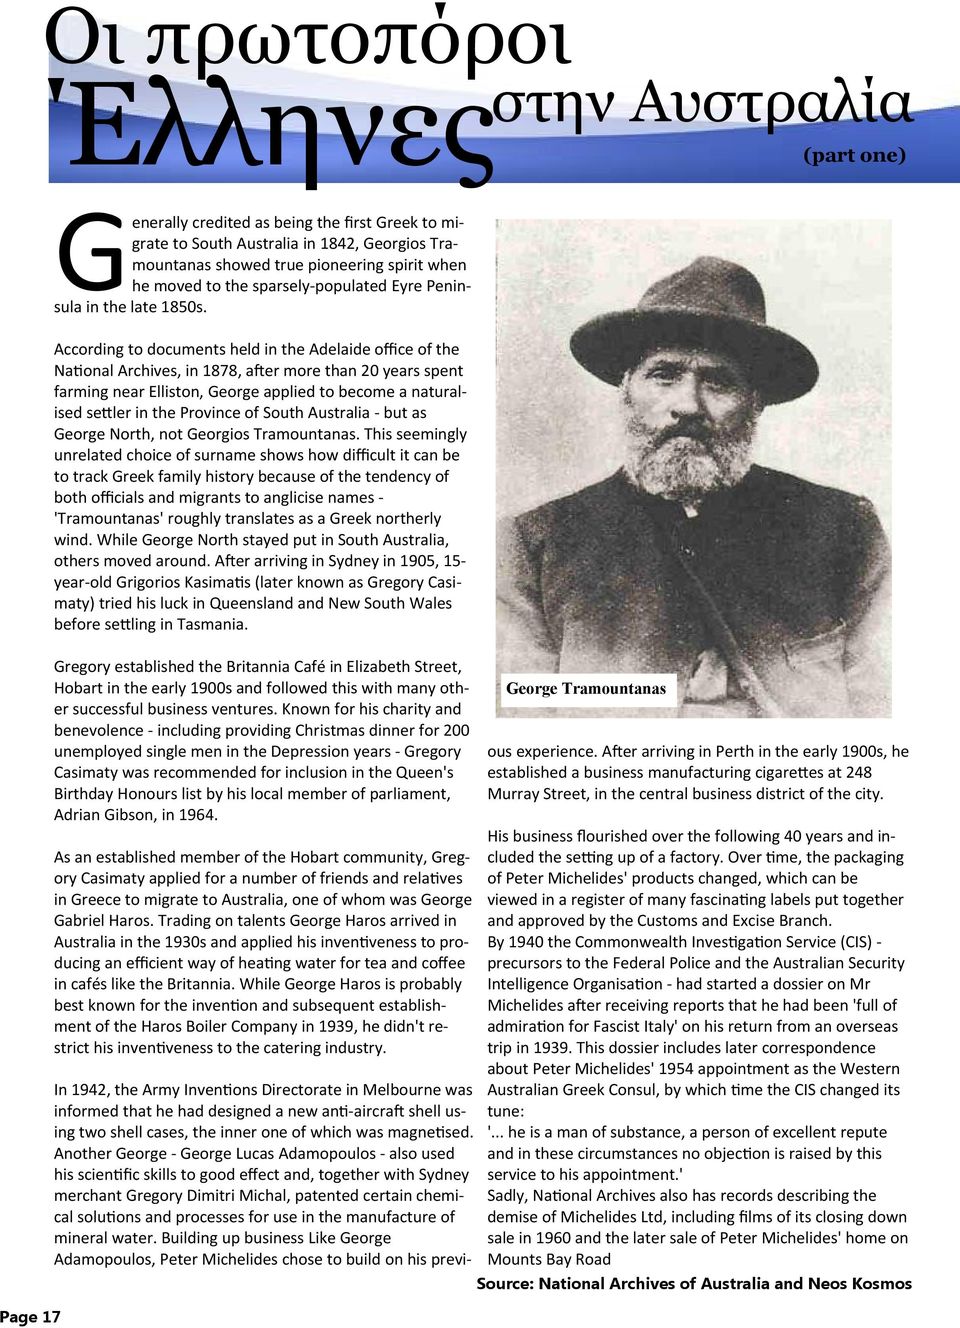 According to documents held in the Adelaide office of the Na onal Archives, in 1878, a er more than 20 years spent farming near Elliston, George applied to become a naturalised se ler in the Province